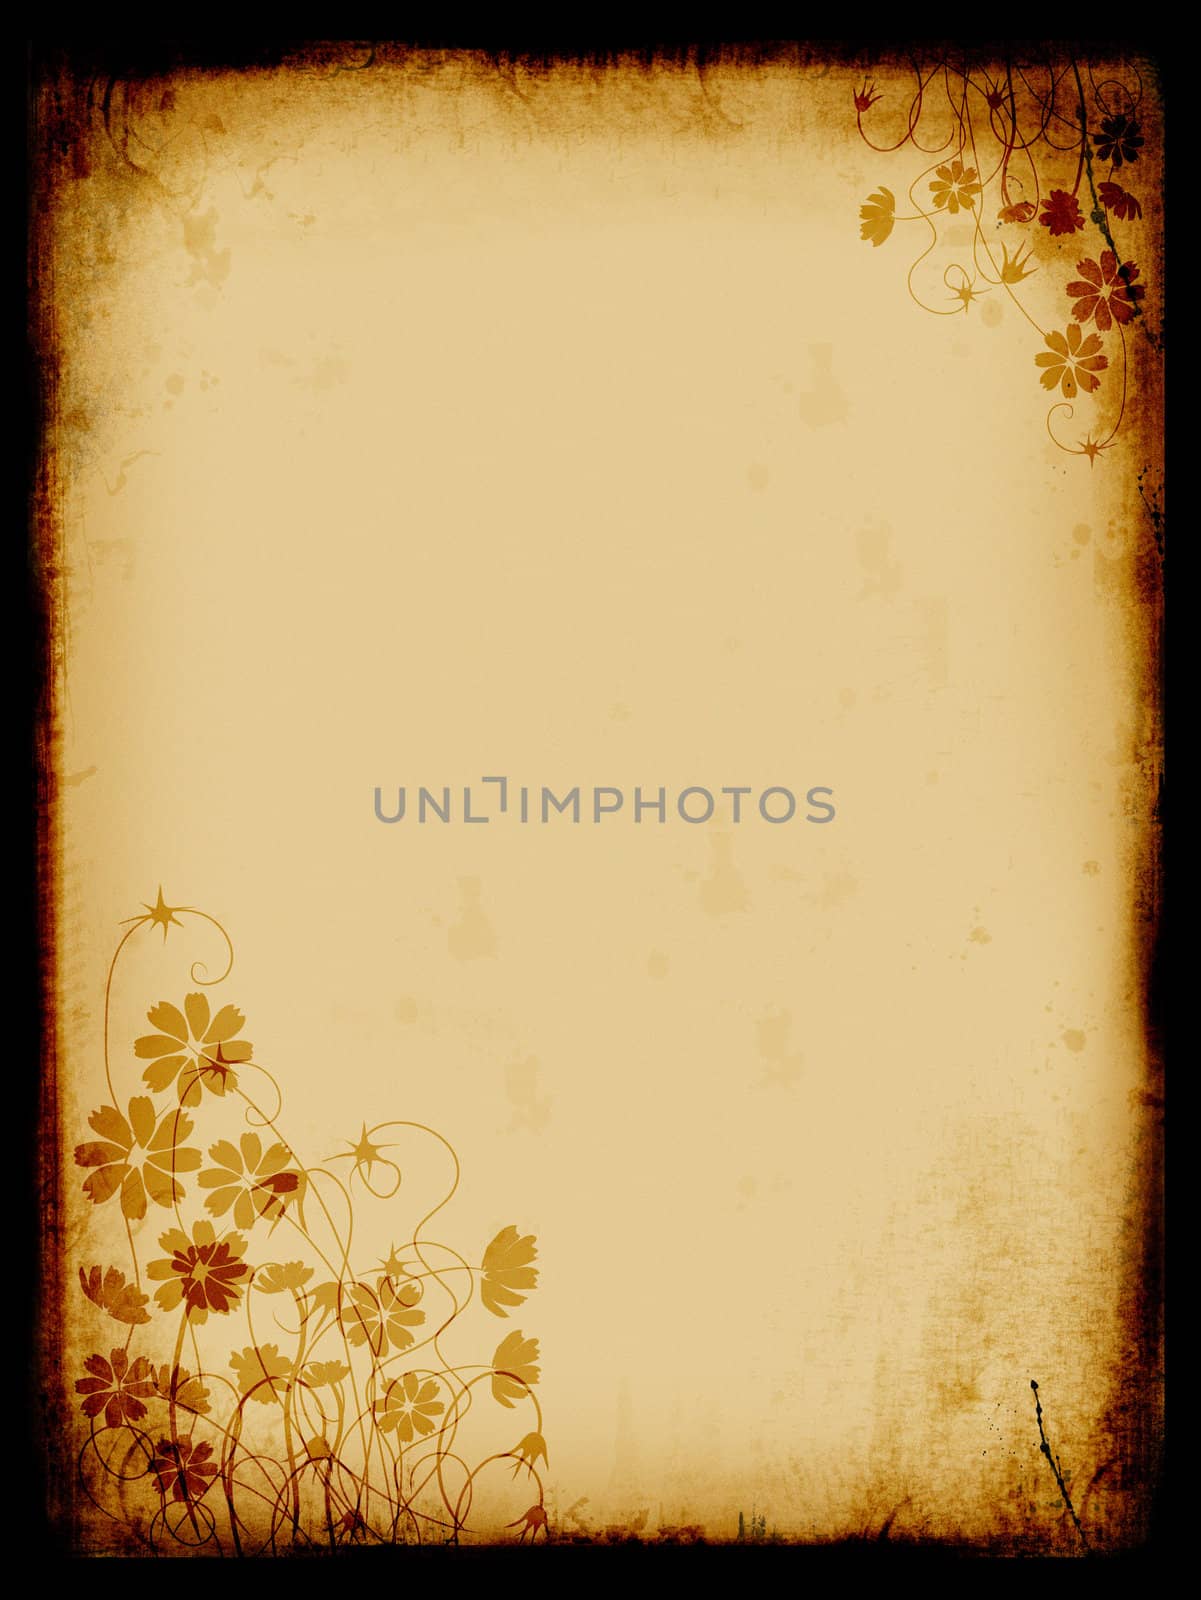 Grunge background, old paper, pattern, flowers